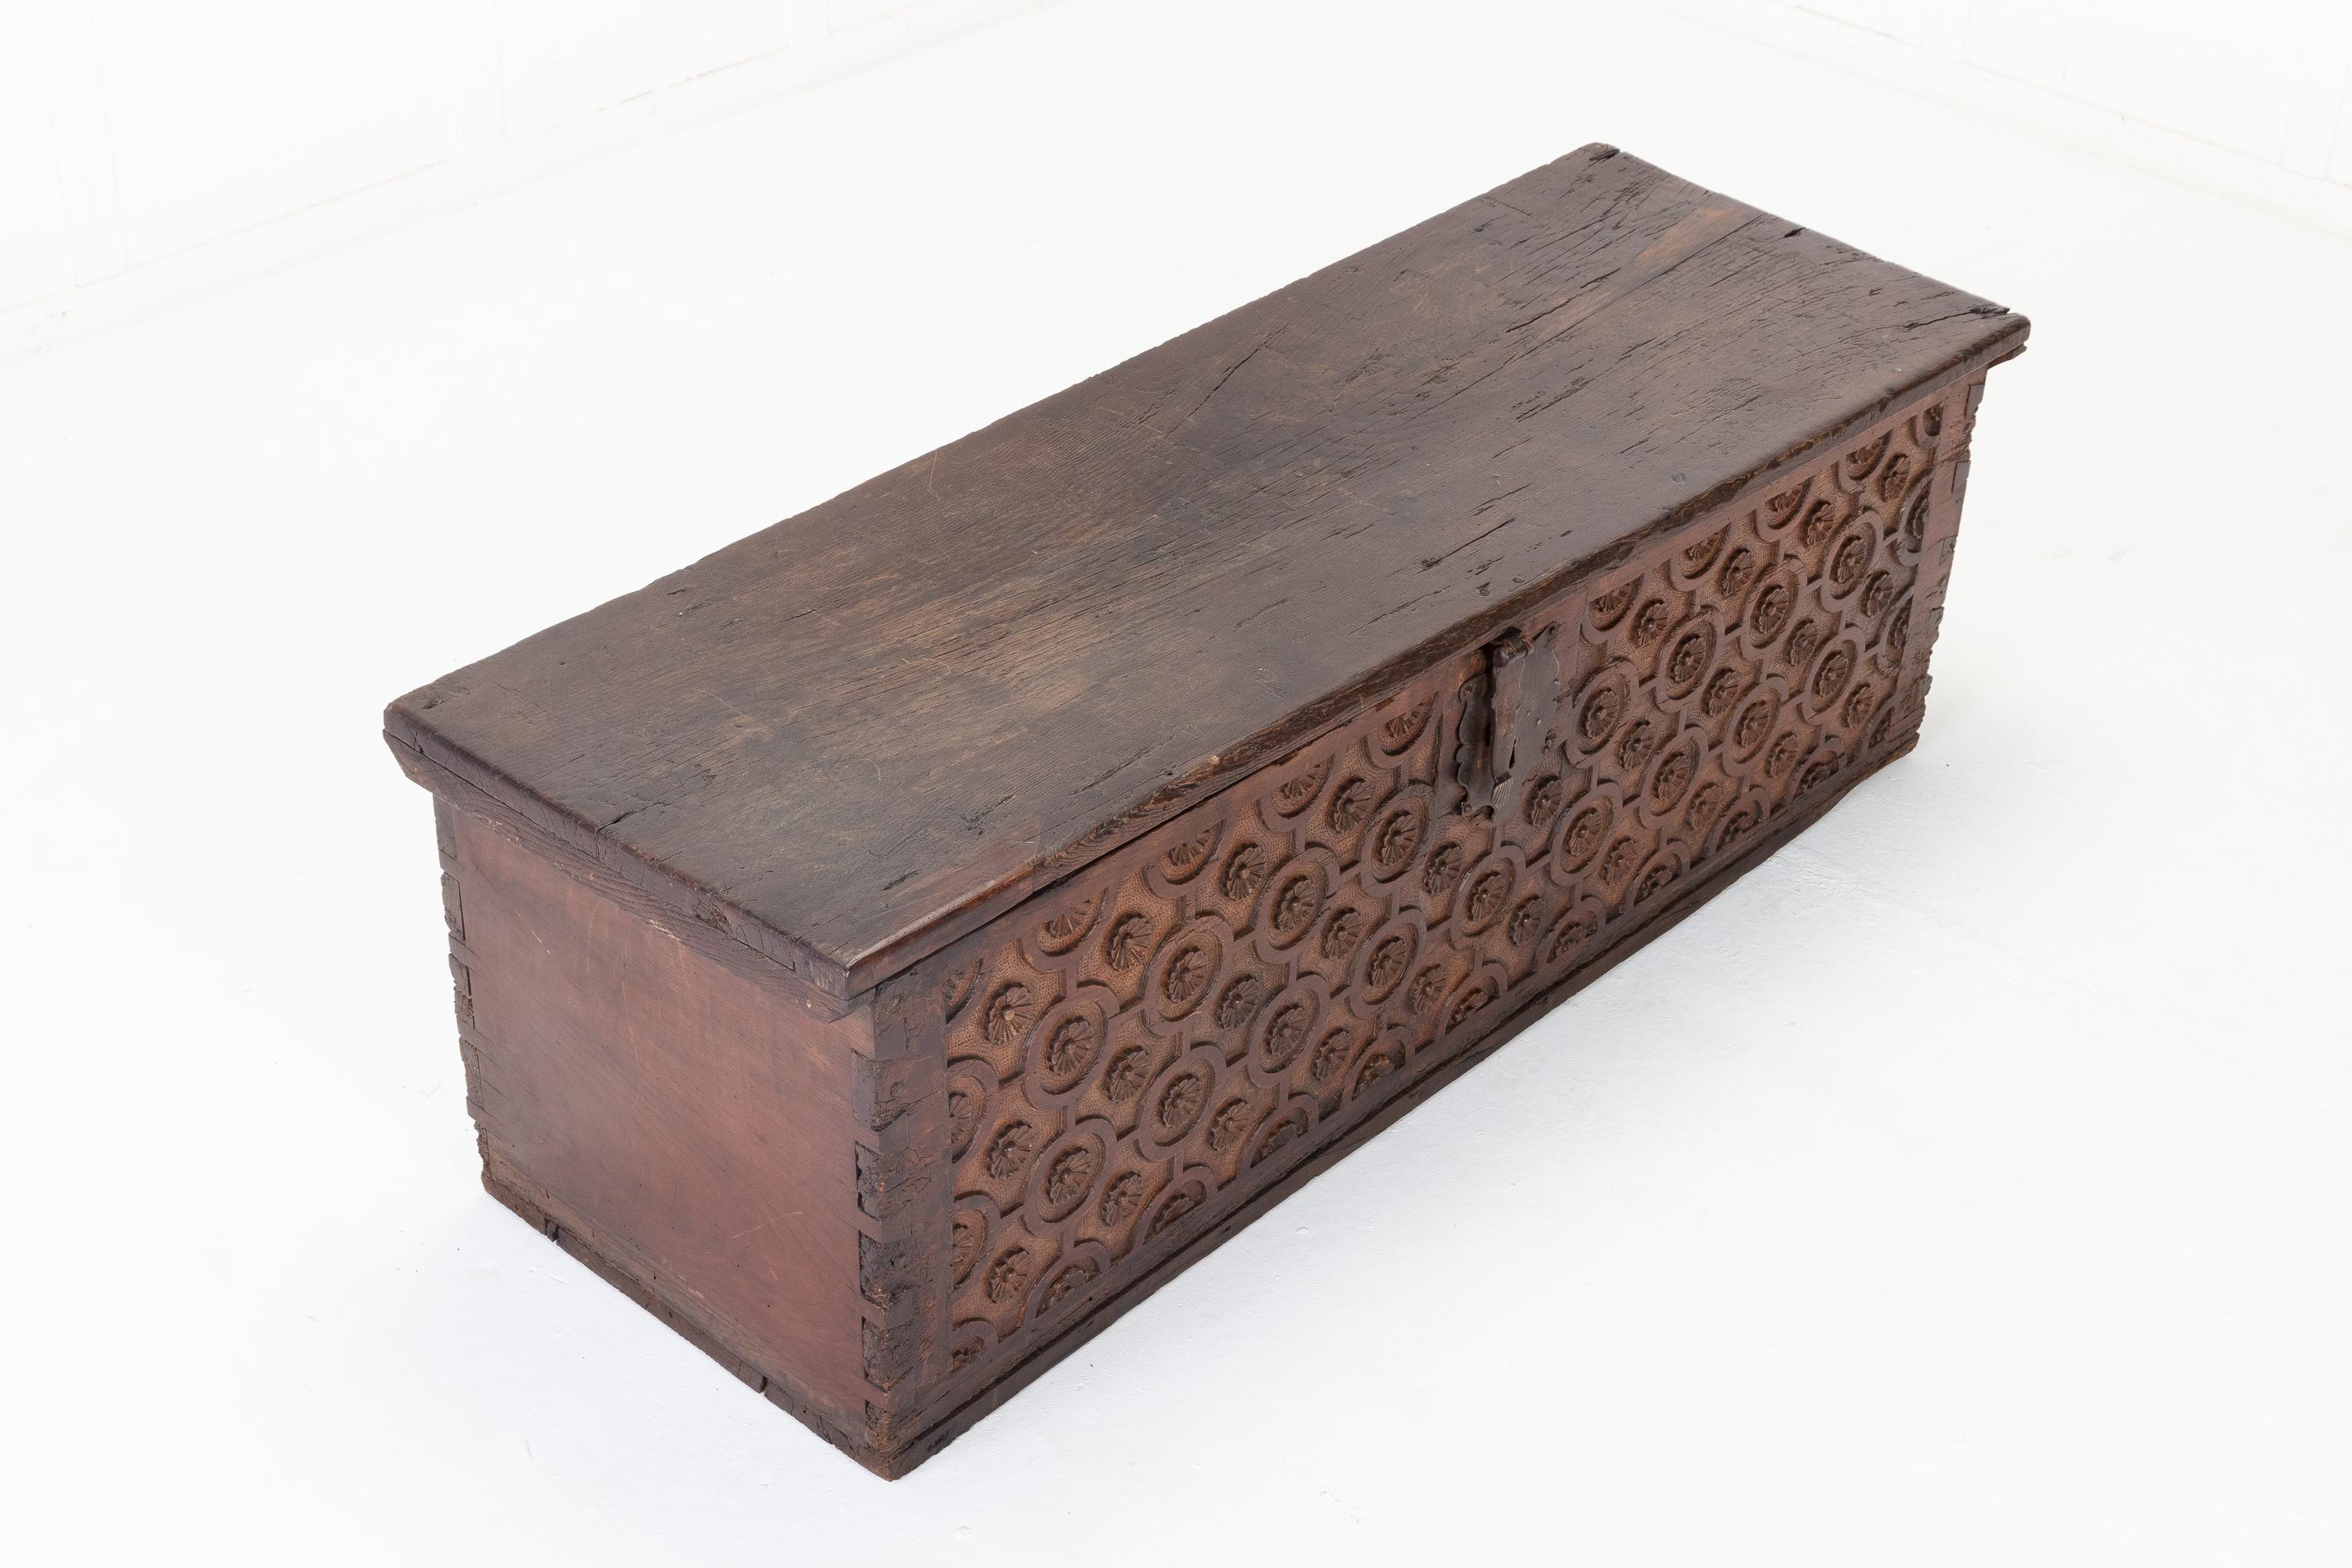 Superb 17th century French chest decorated with patterns of rosettes within circle carvings on the front panel. A solid construction having a single plank, hinged lid that opens to reveal two compartments. Four solid oak slabs with rustic